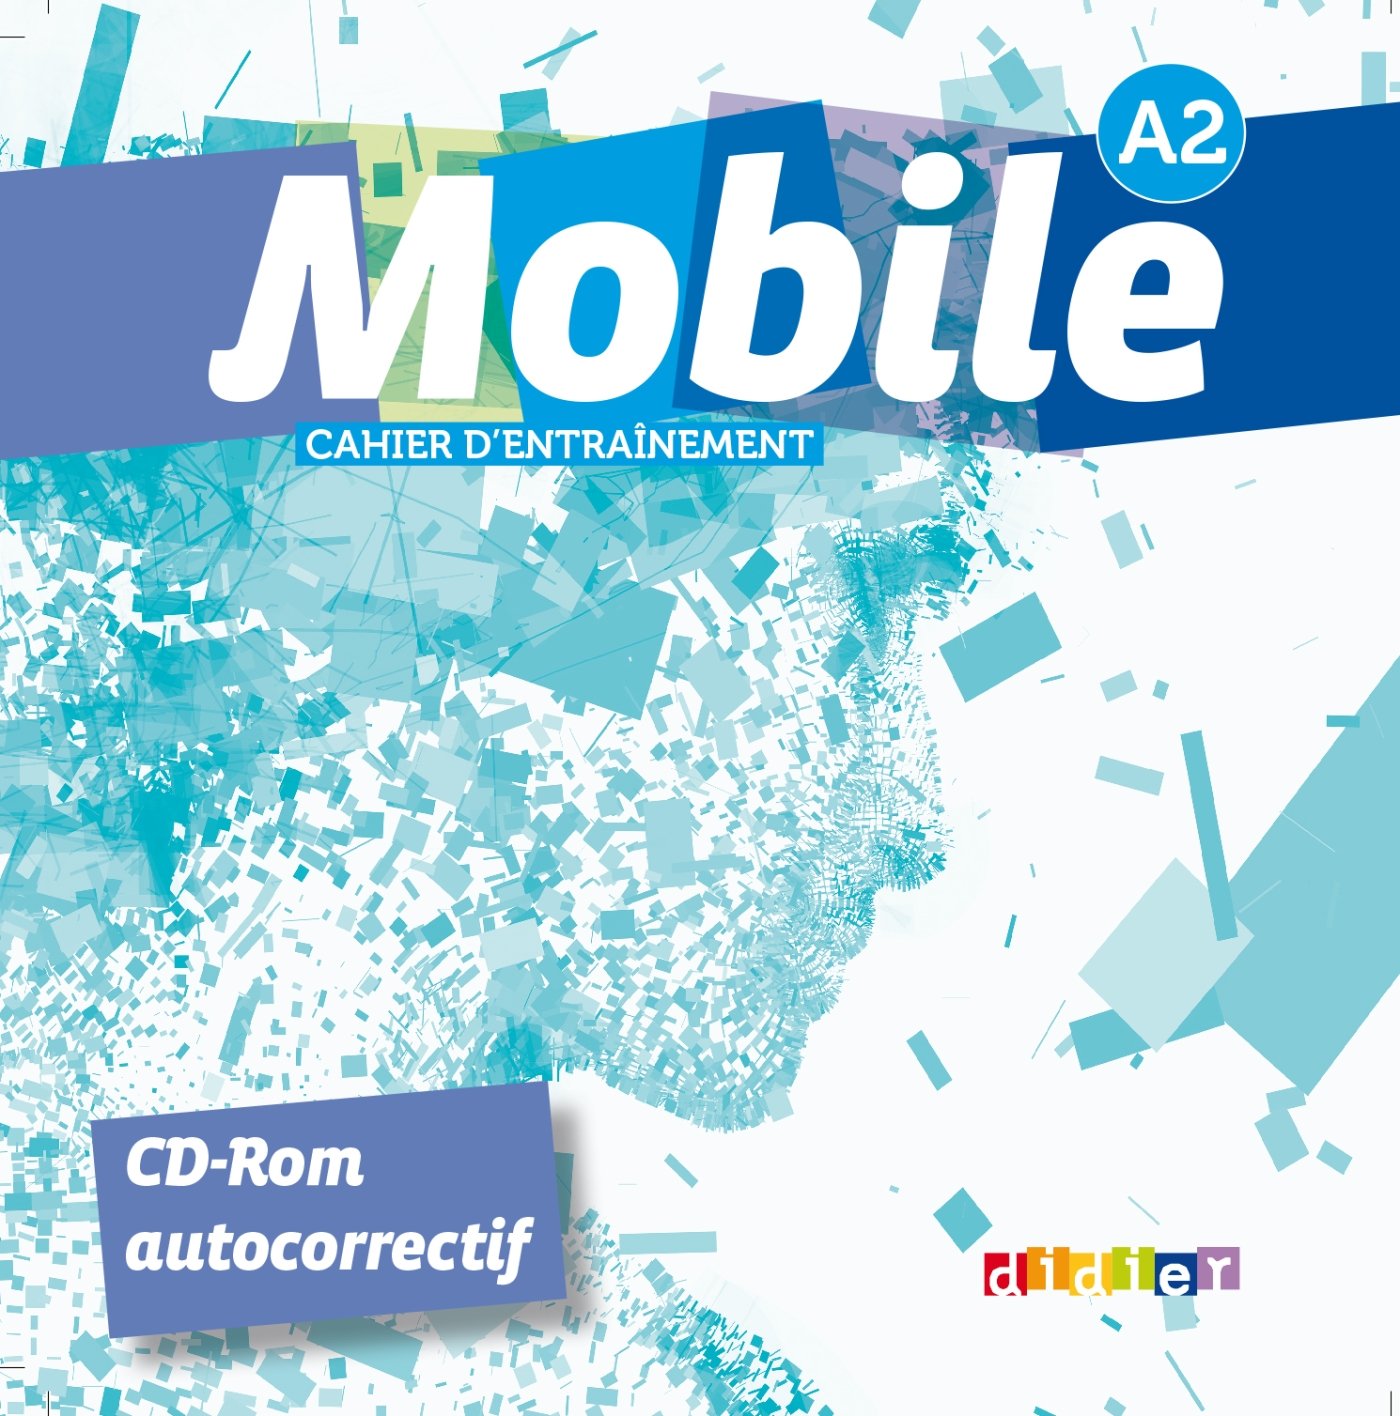 MOBILE 2 Cahier d'entrainement CD-ROM